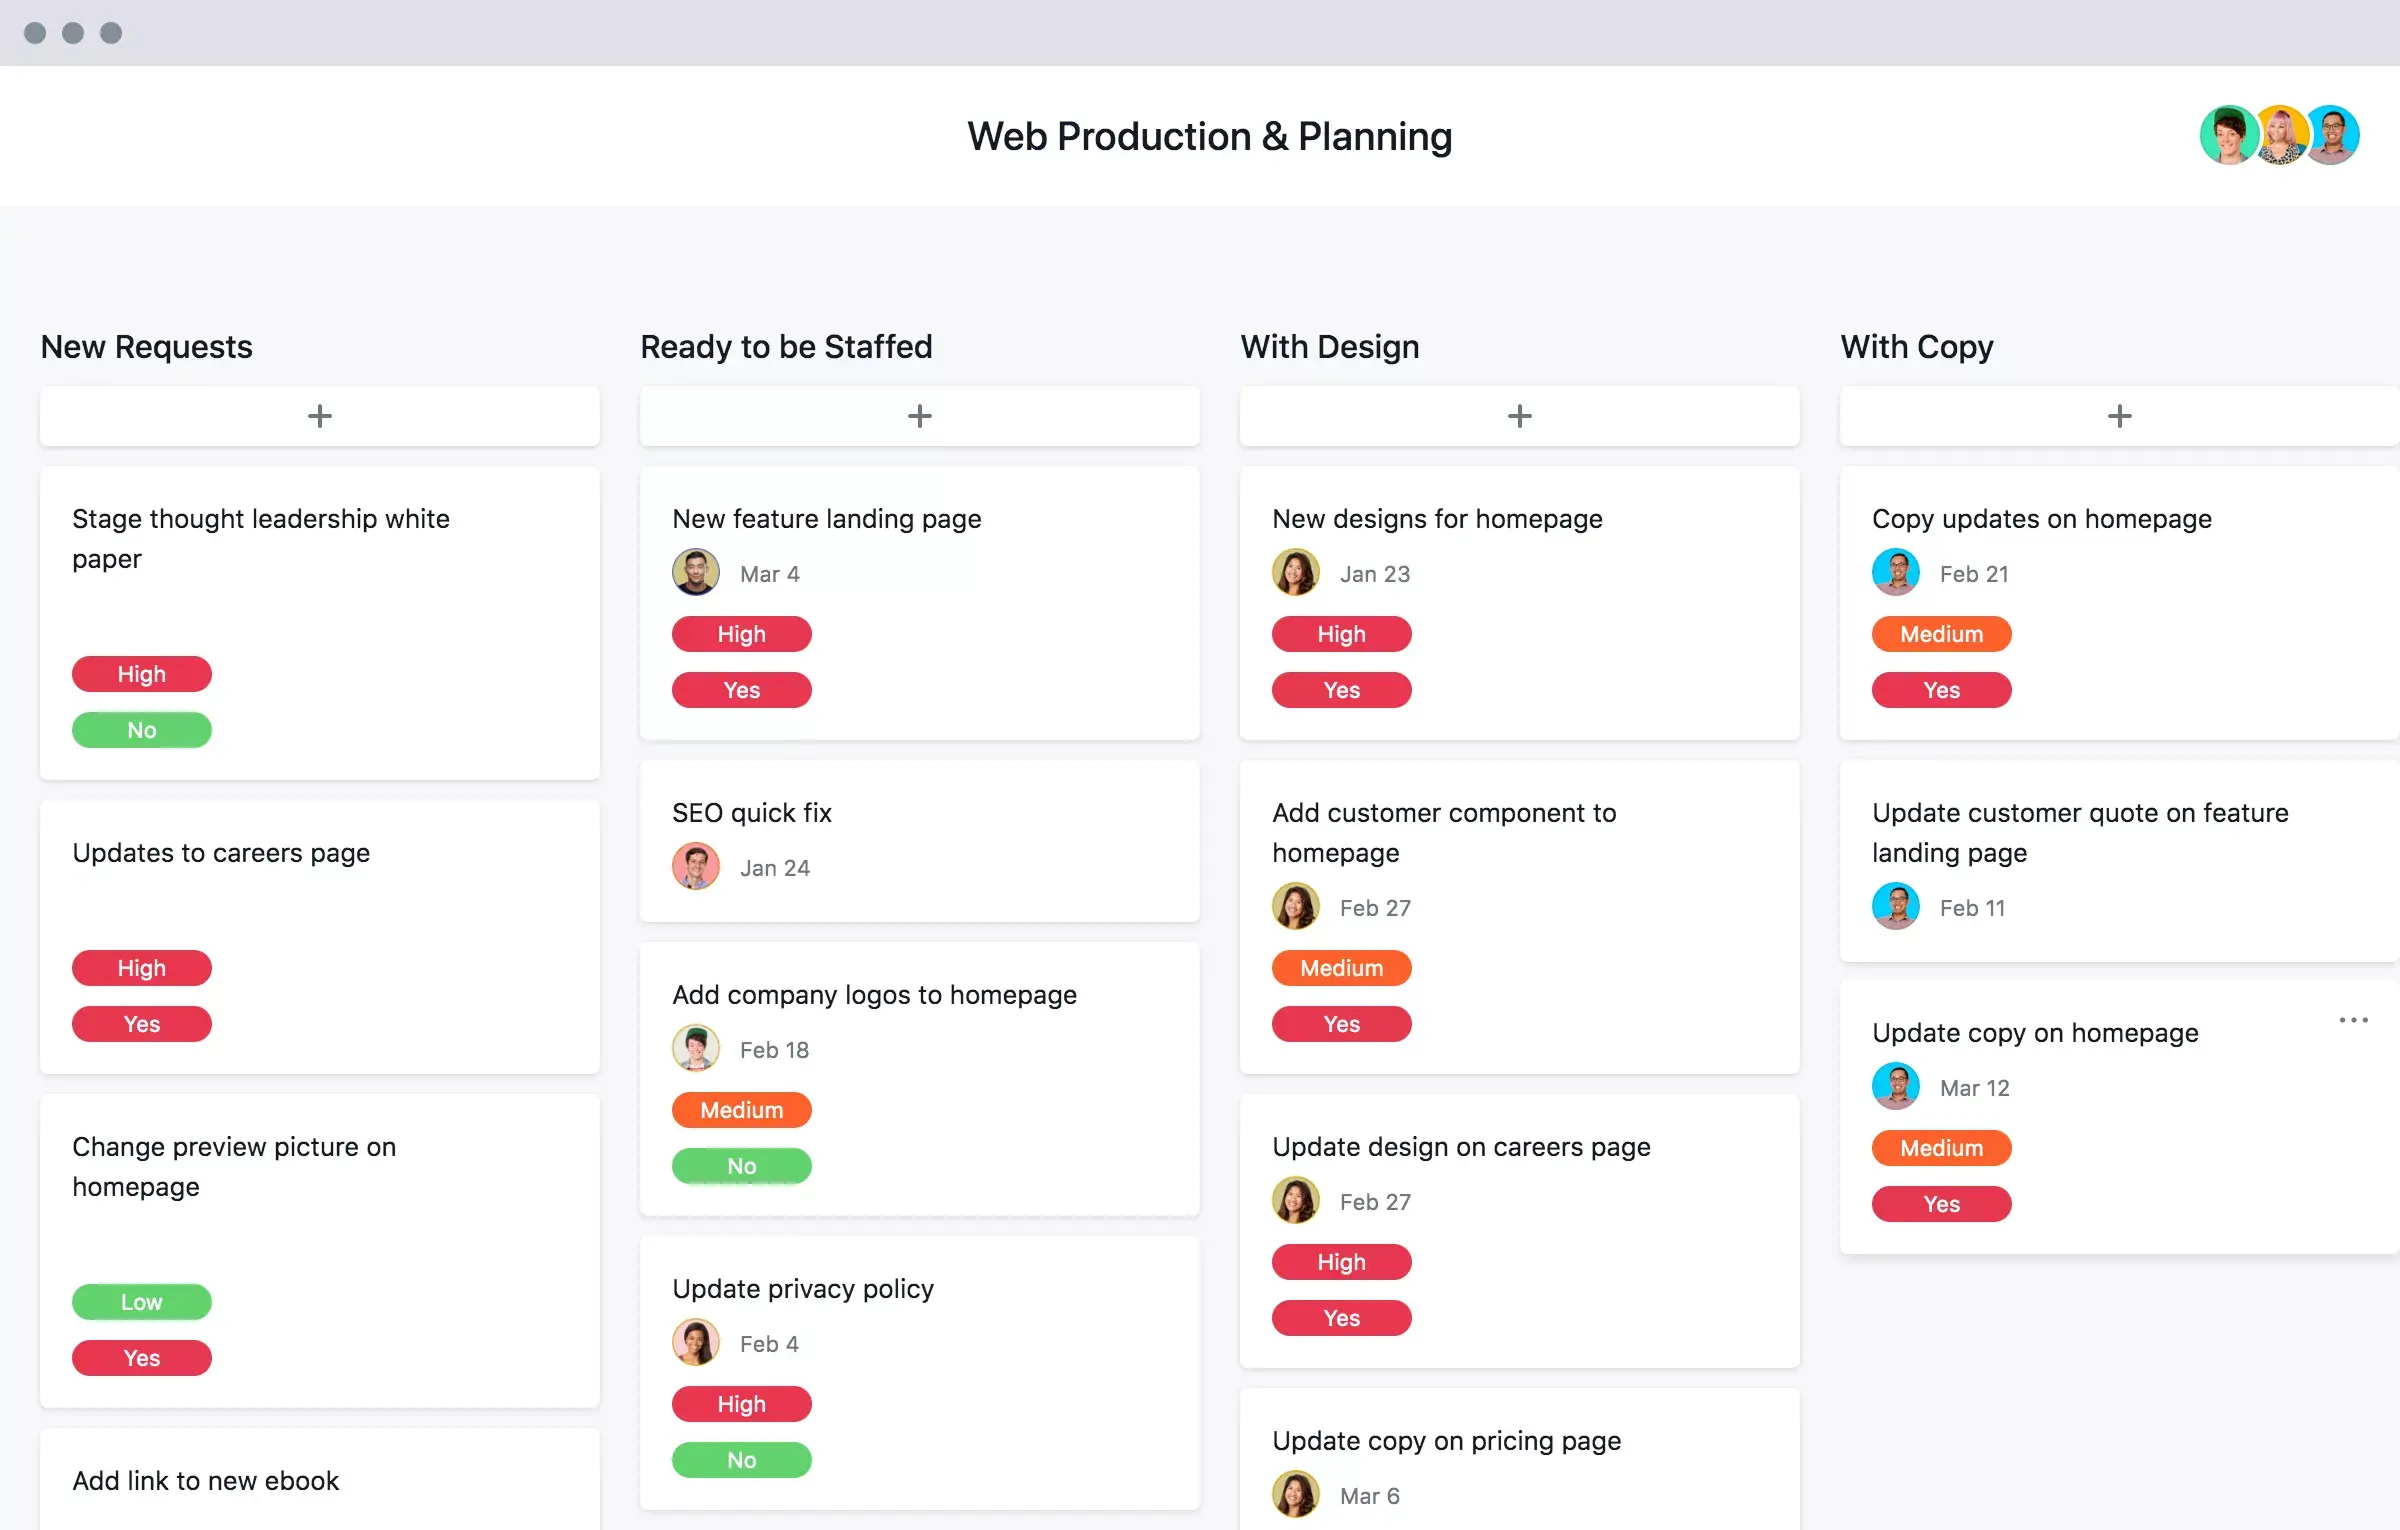 [Old product ui] Web production process template, Kanban style project view in Asana (Boards)